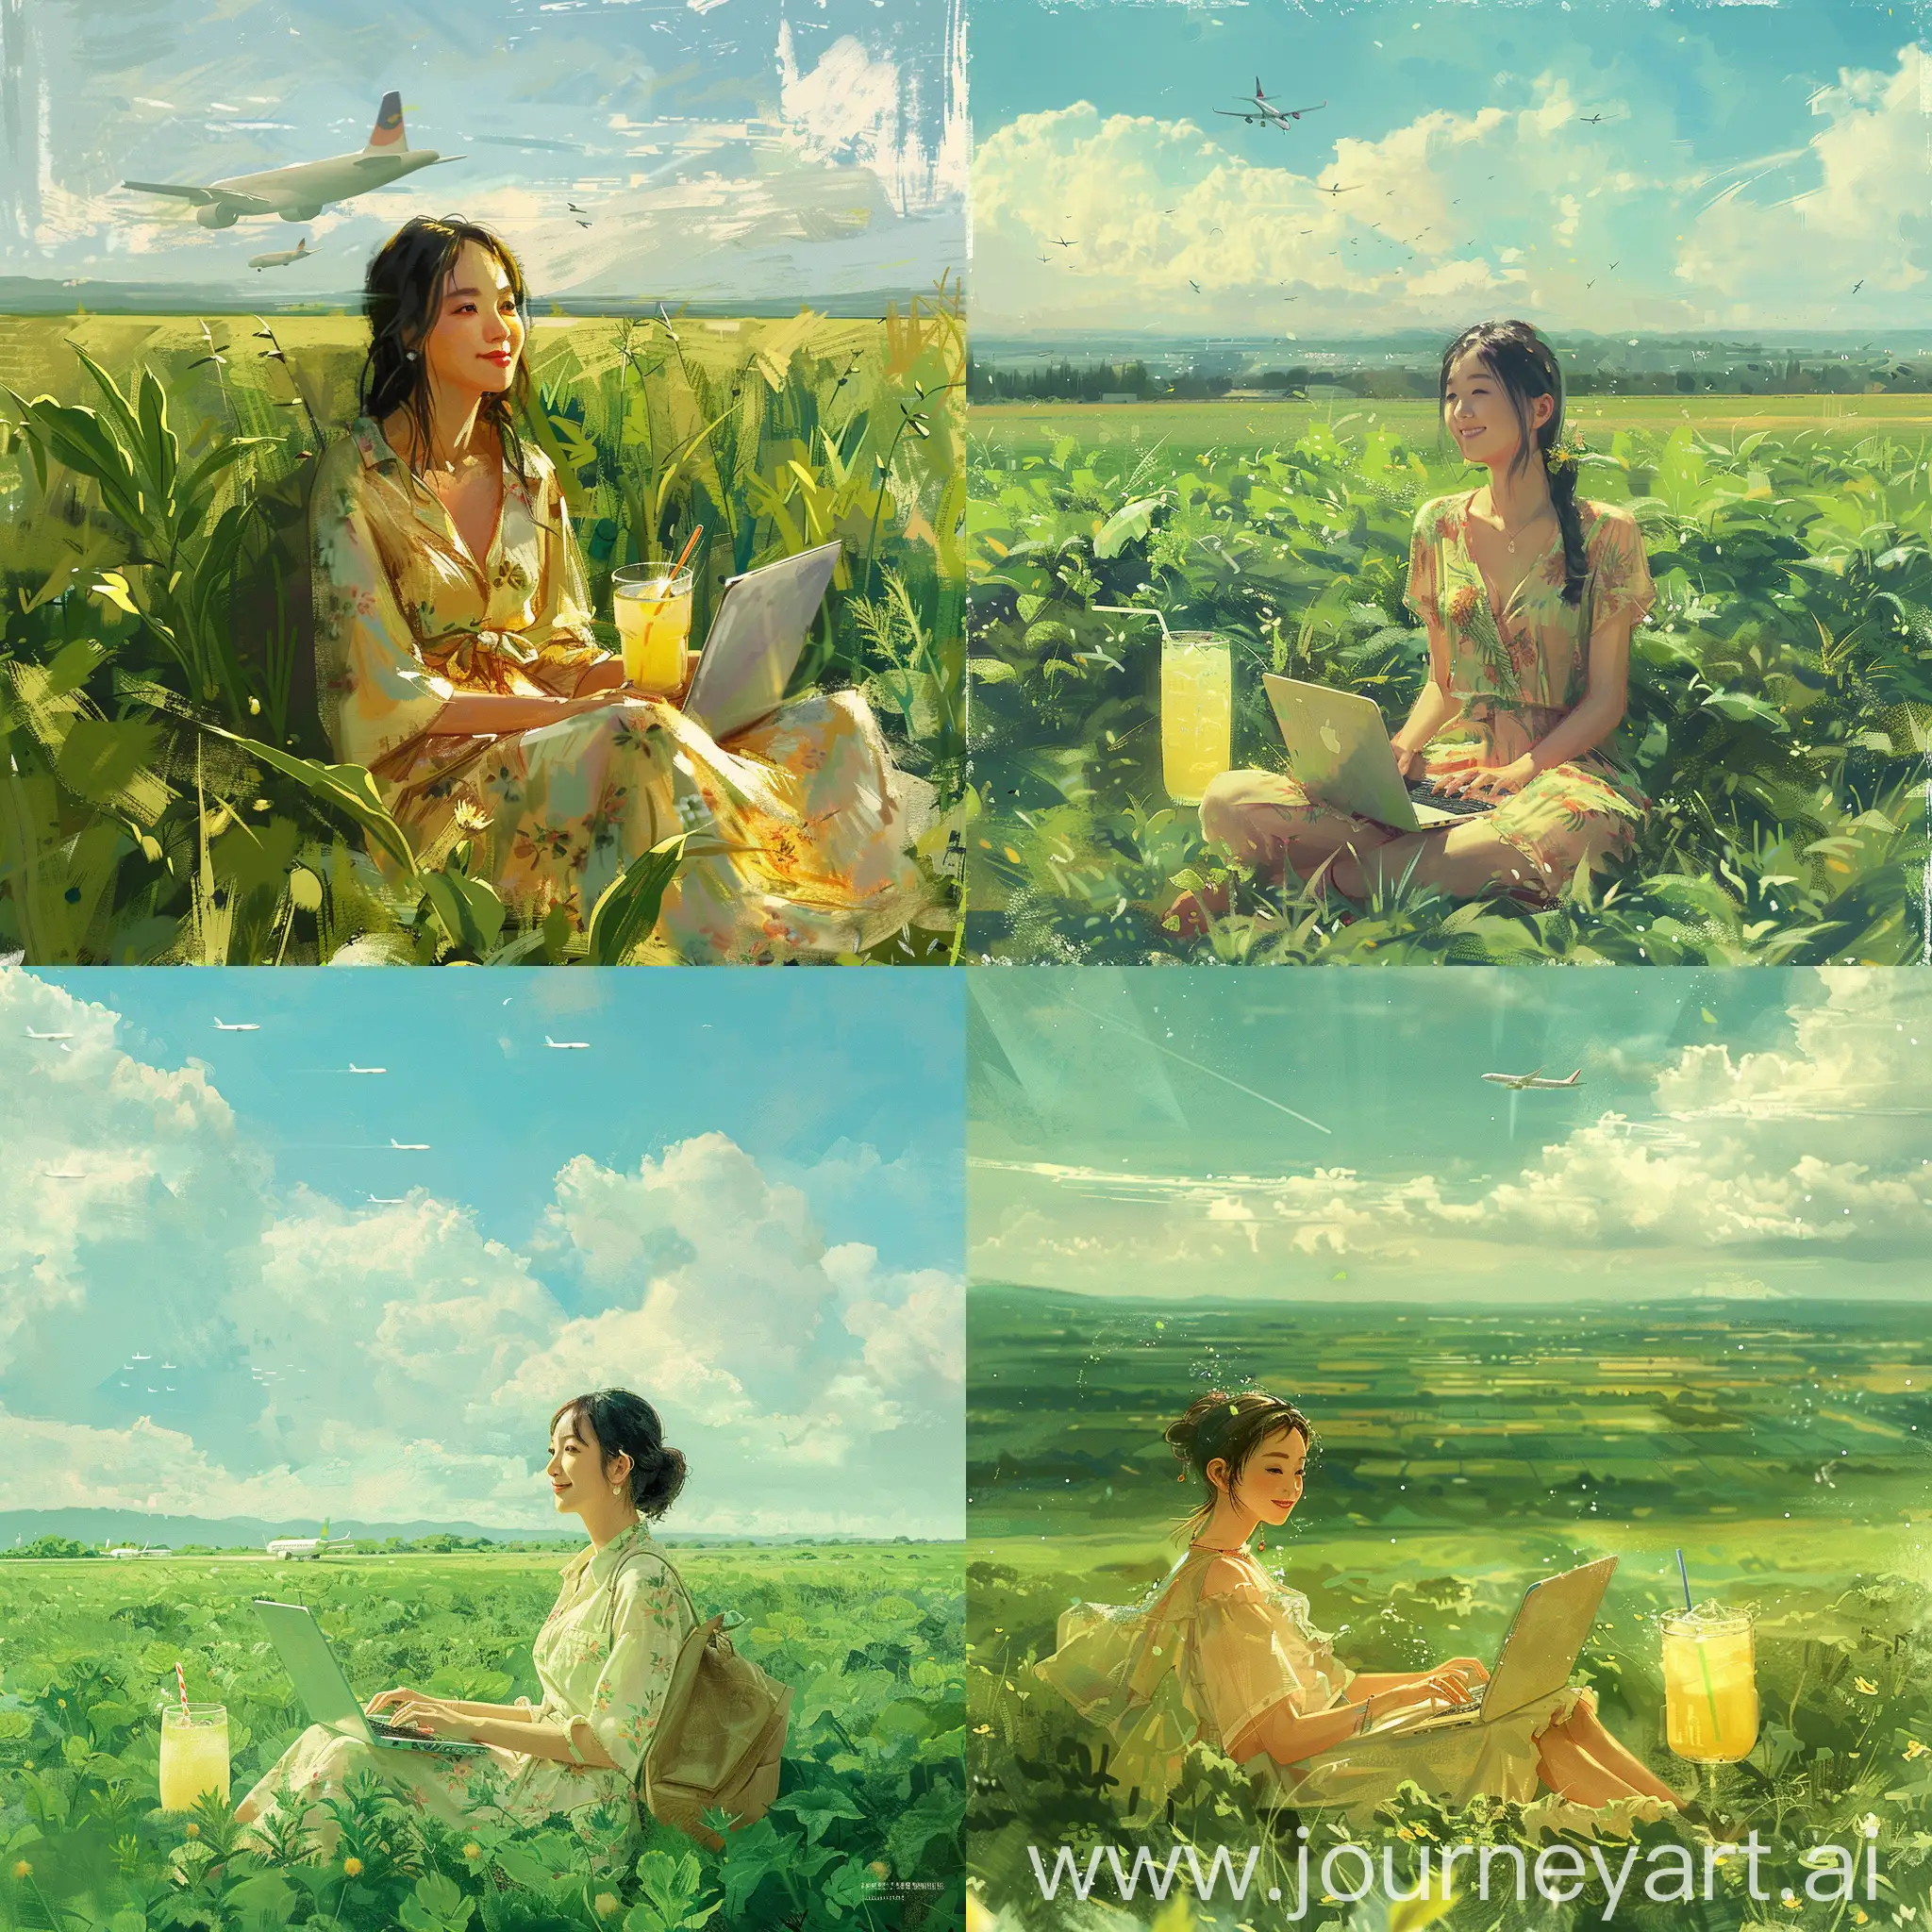 An Asian beauty is sitting in a vast field, surrounded by endless greenery. She's dressed in comfortable summer attire, engrossed in playing with her laptop. Next to her, there's a drink that looks very refreshing, possibly lemonade or iced tea. Her expression is relaxed and joyful, occasionally looking up to the sky to watch planes flying by, as if imagining her next travel destination. The entire scene is filled with the leisure of summer and anticipation for the future.